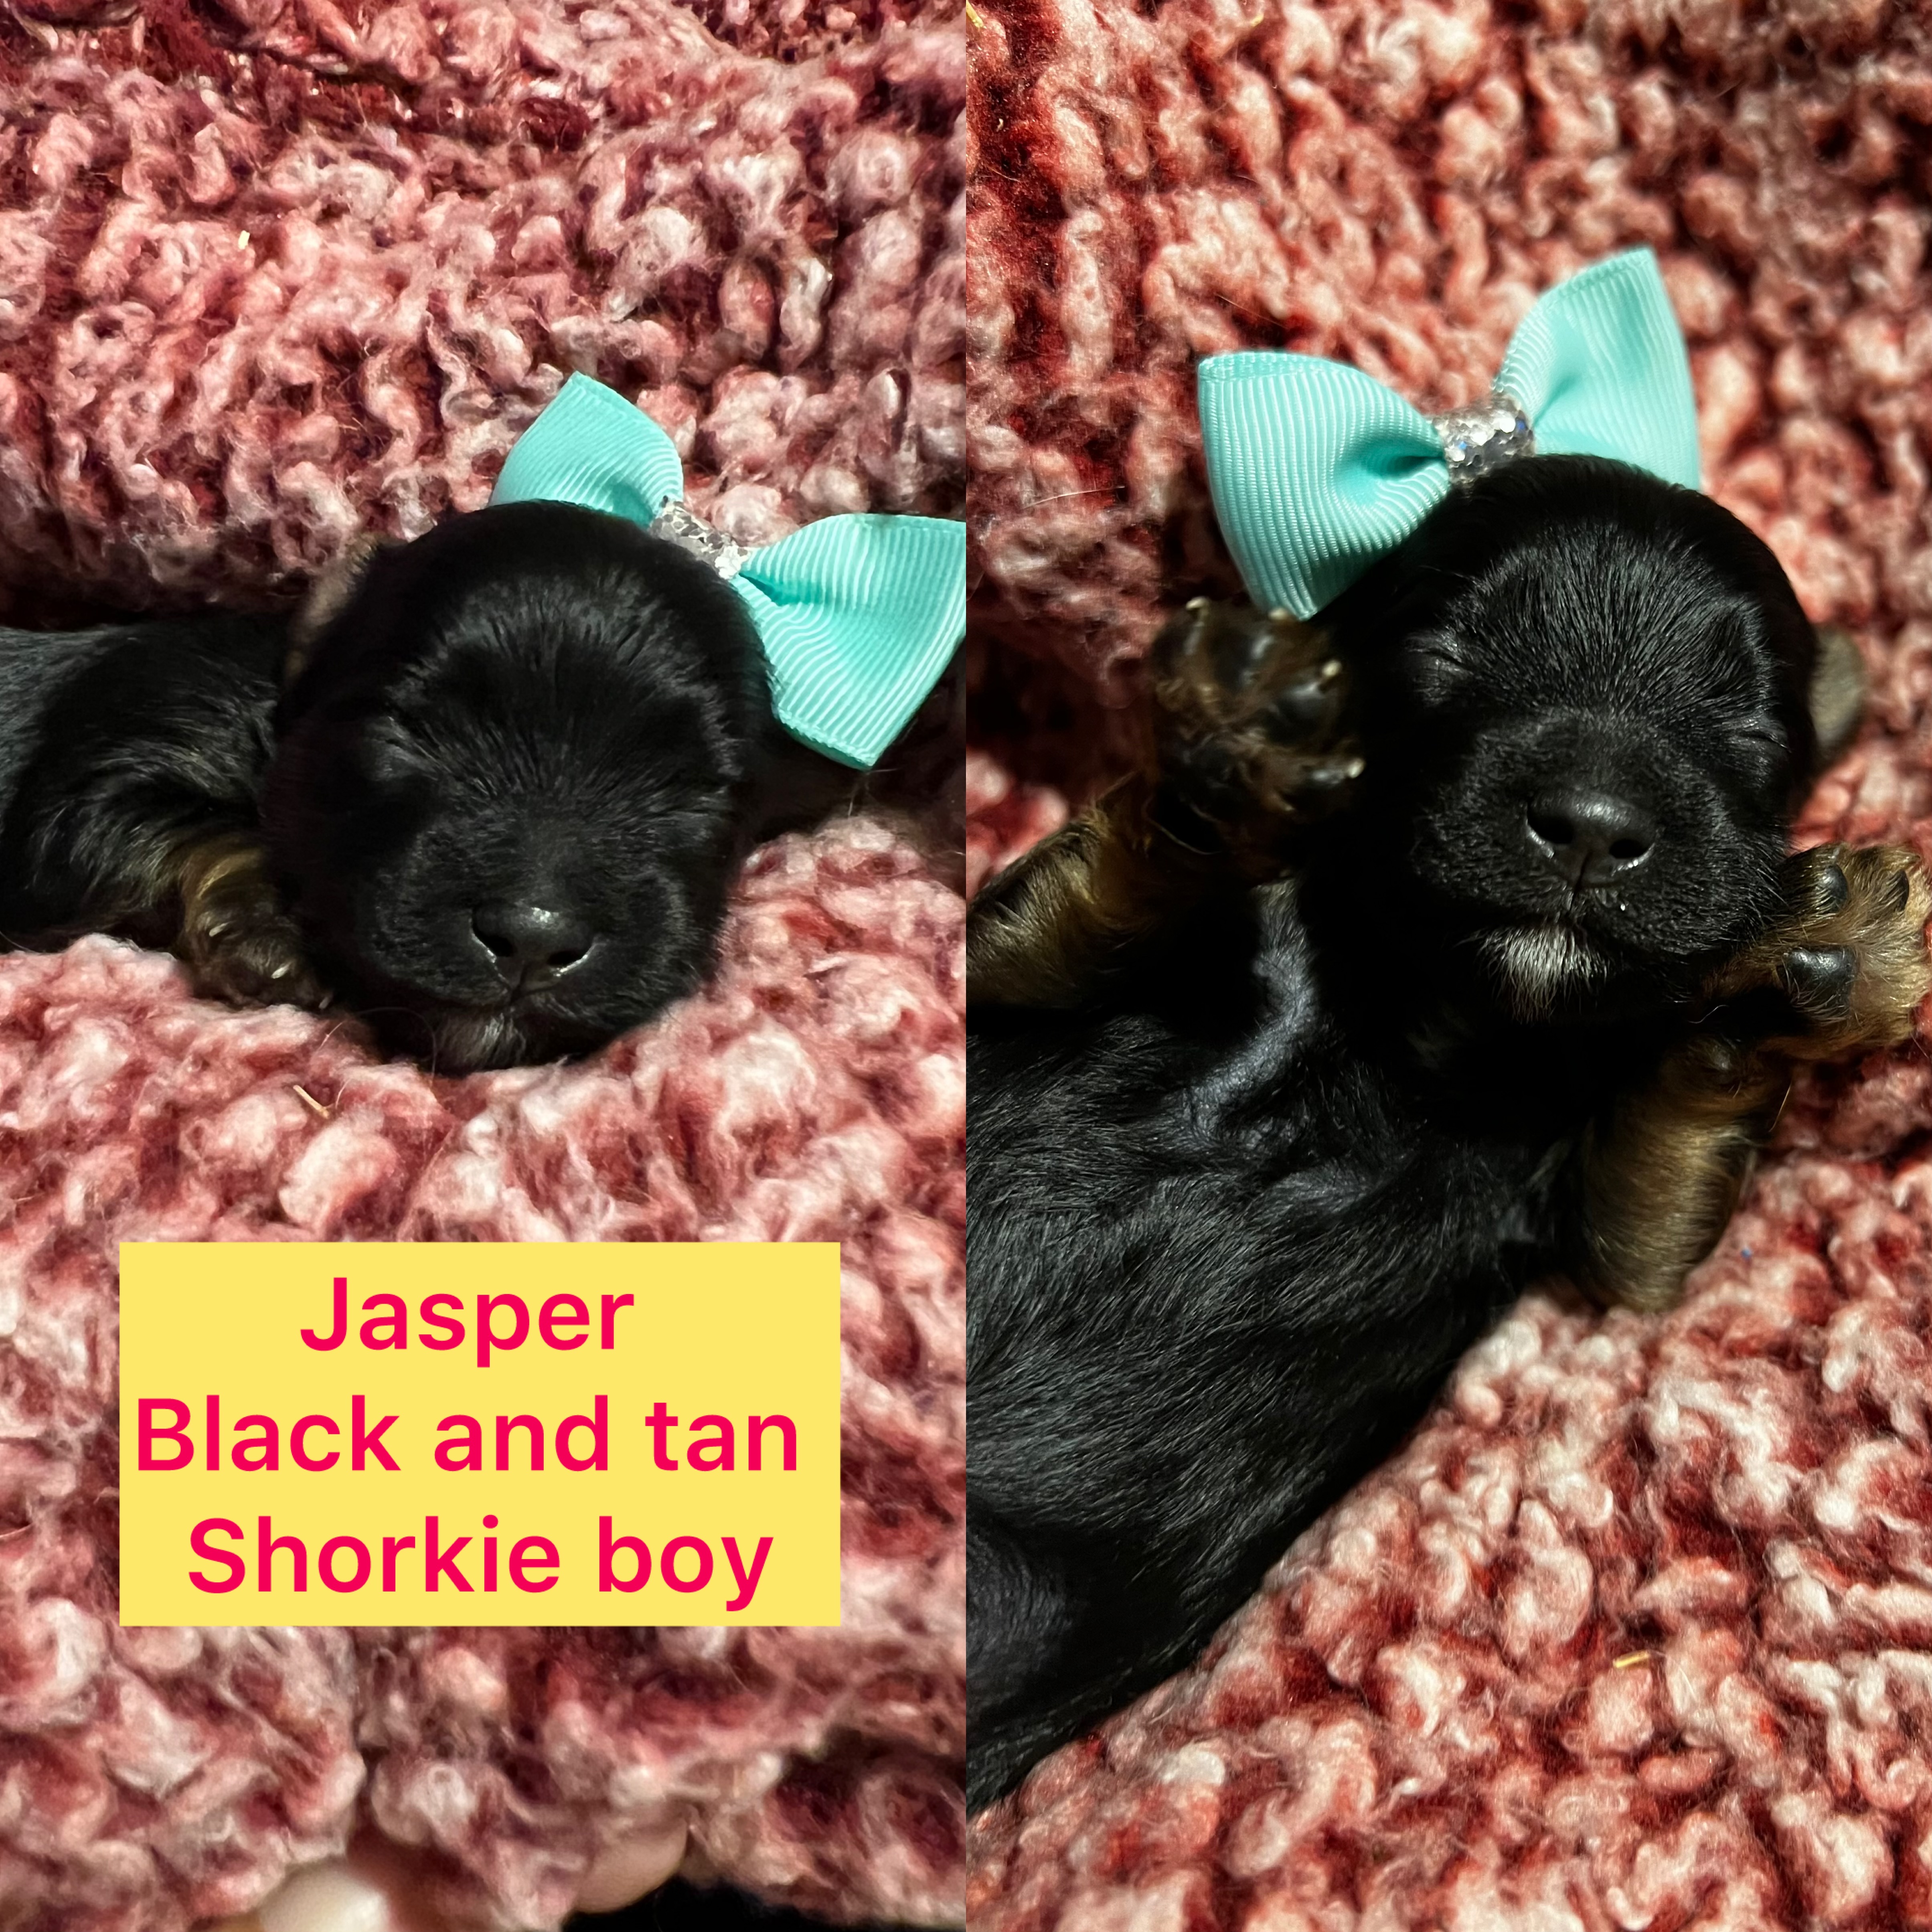 Jasper AVAILABLE shorkie boy click on pic for info